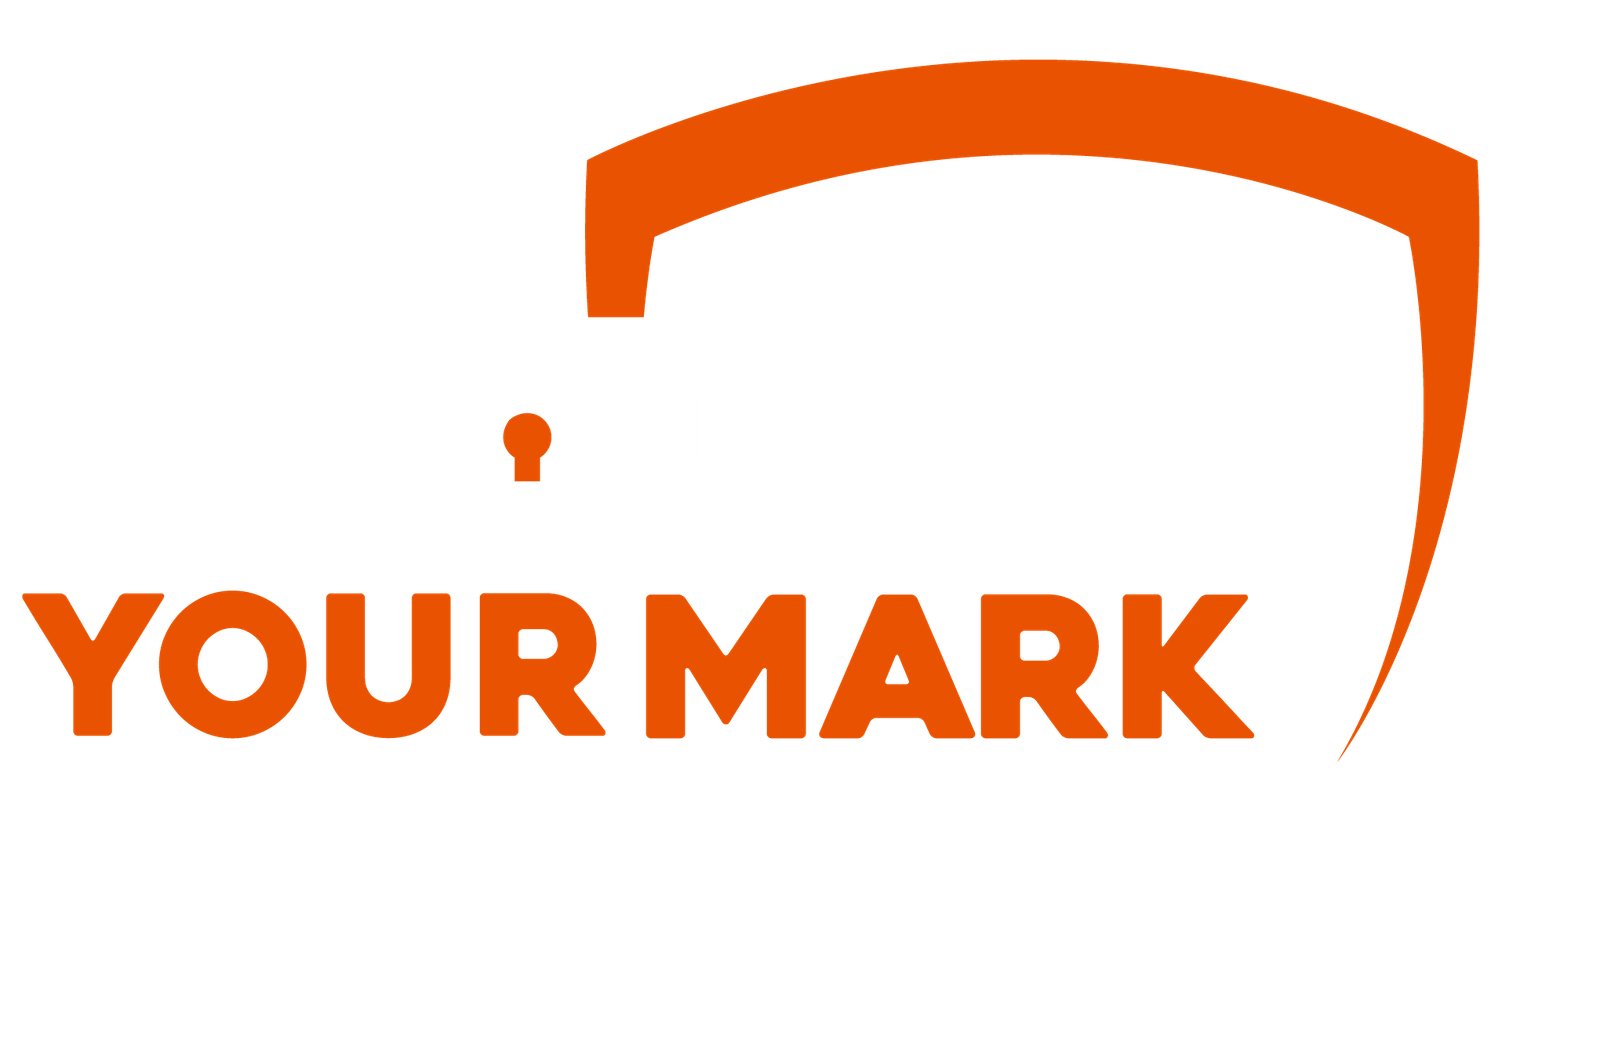 Secure Your Mark